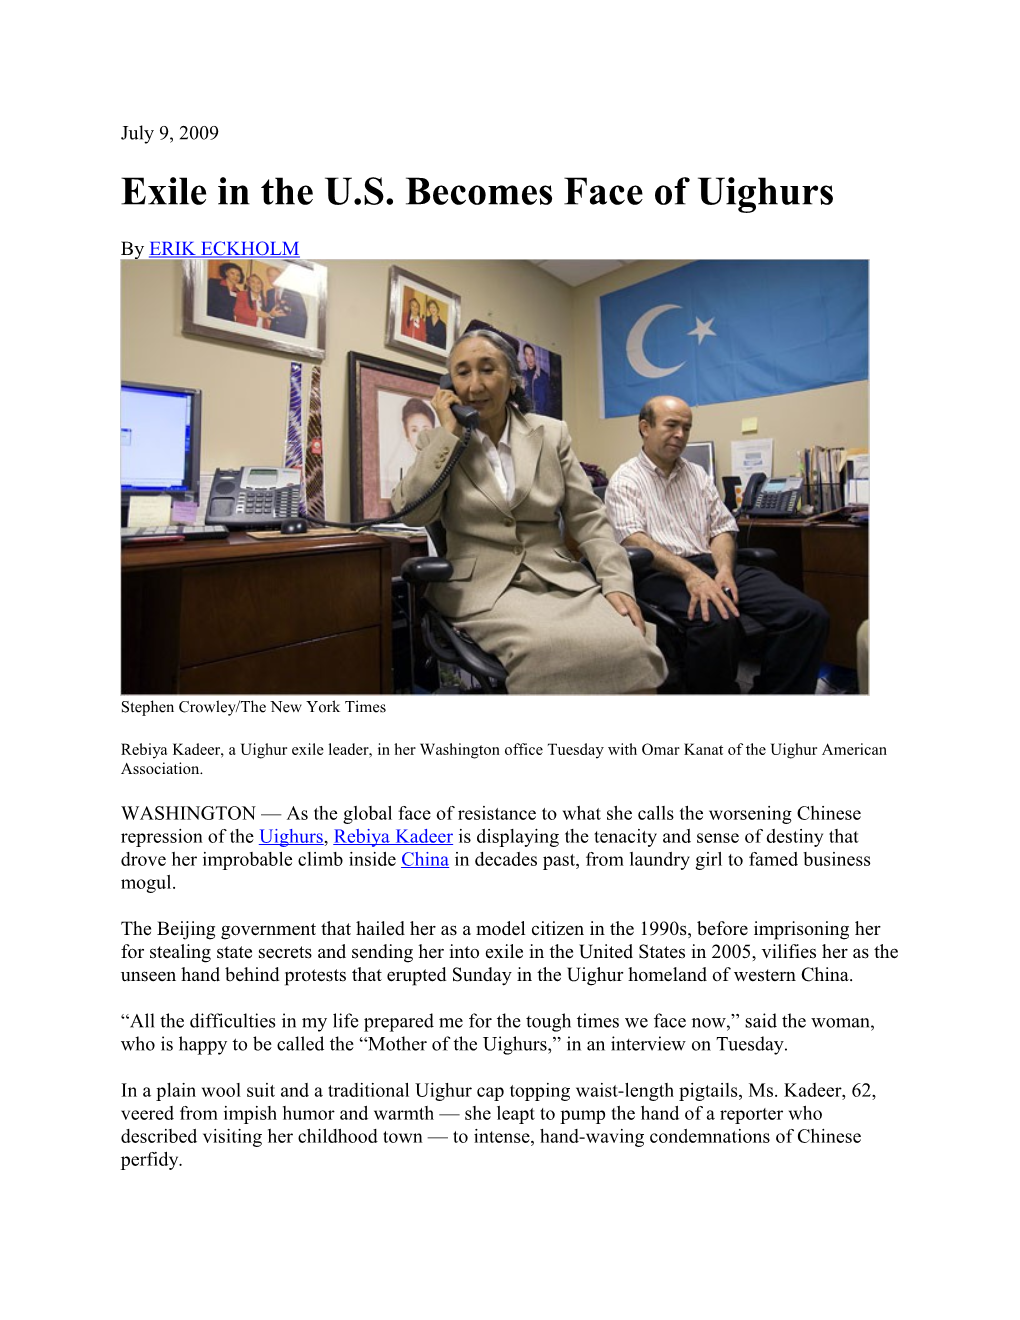 Exile in the U.S. Becomes Face of Uighurs